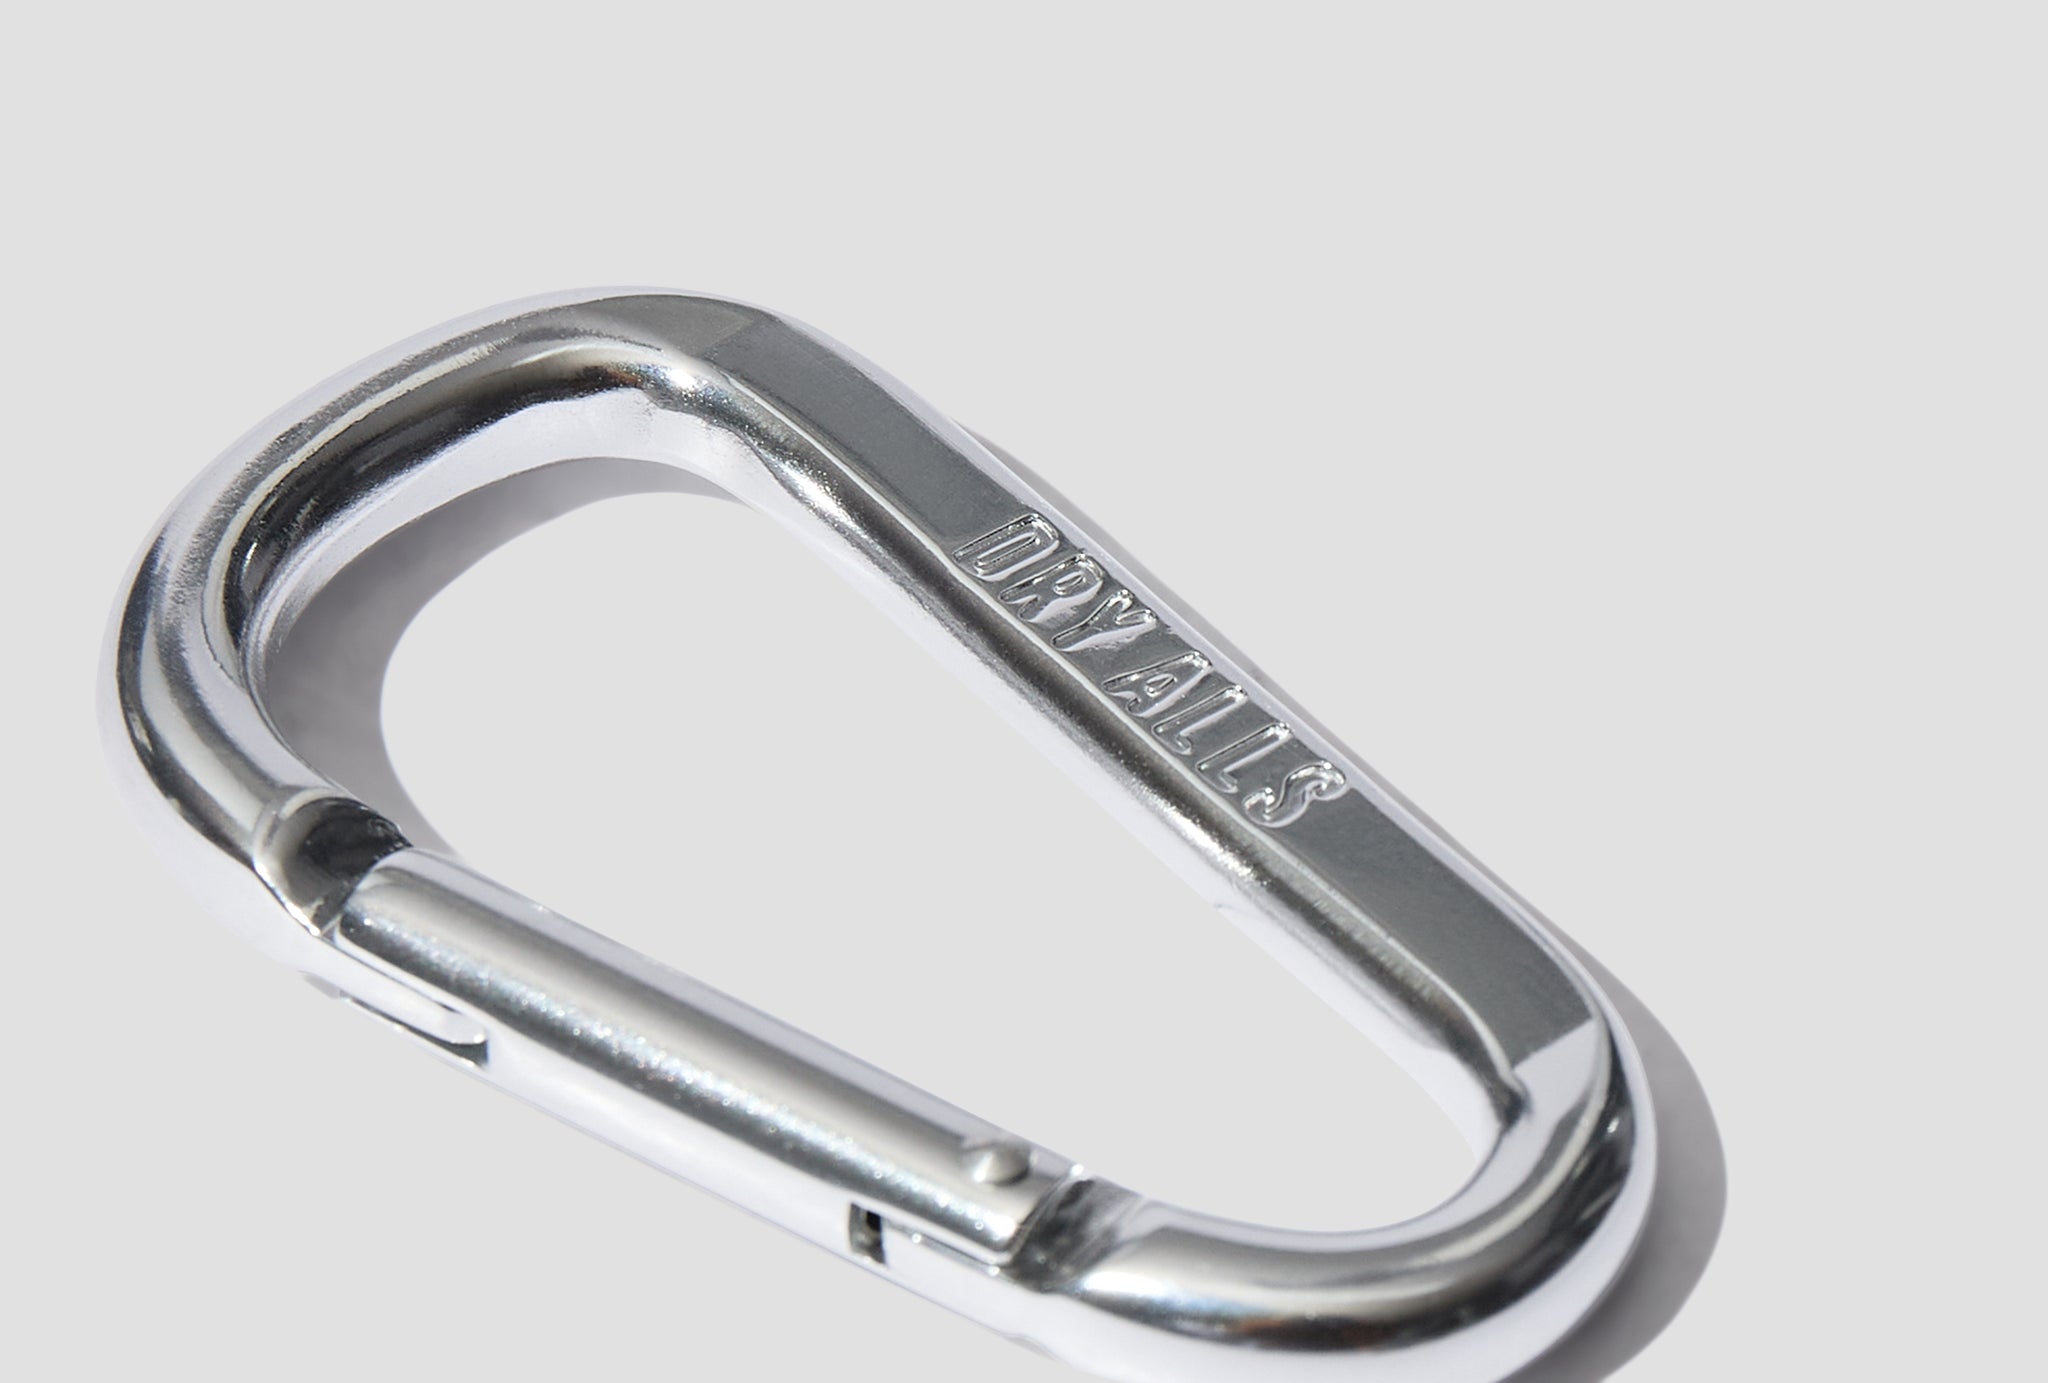 CARABINER 70MM HM27GD062 Silver